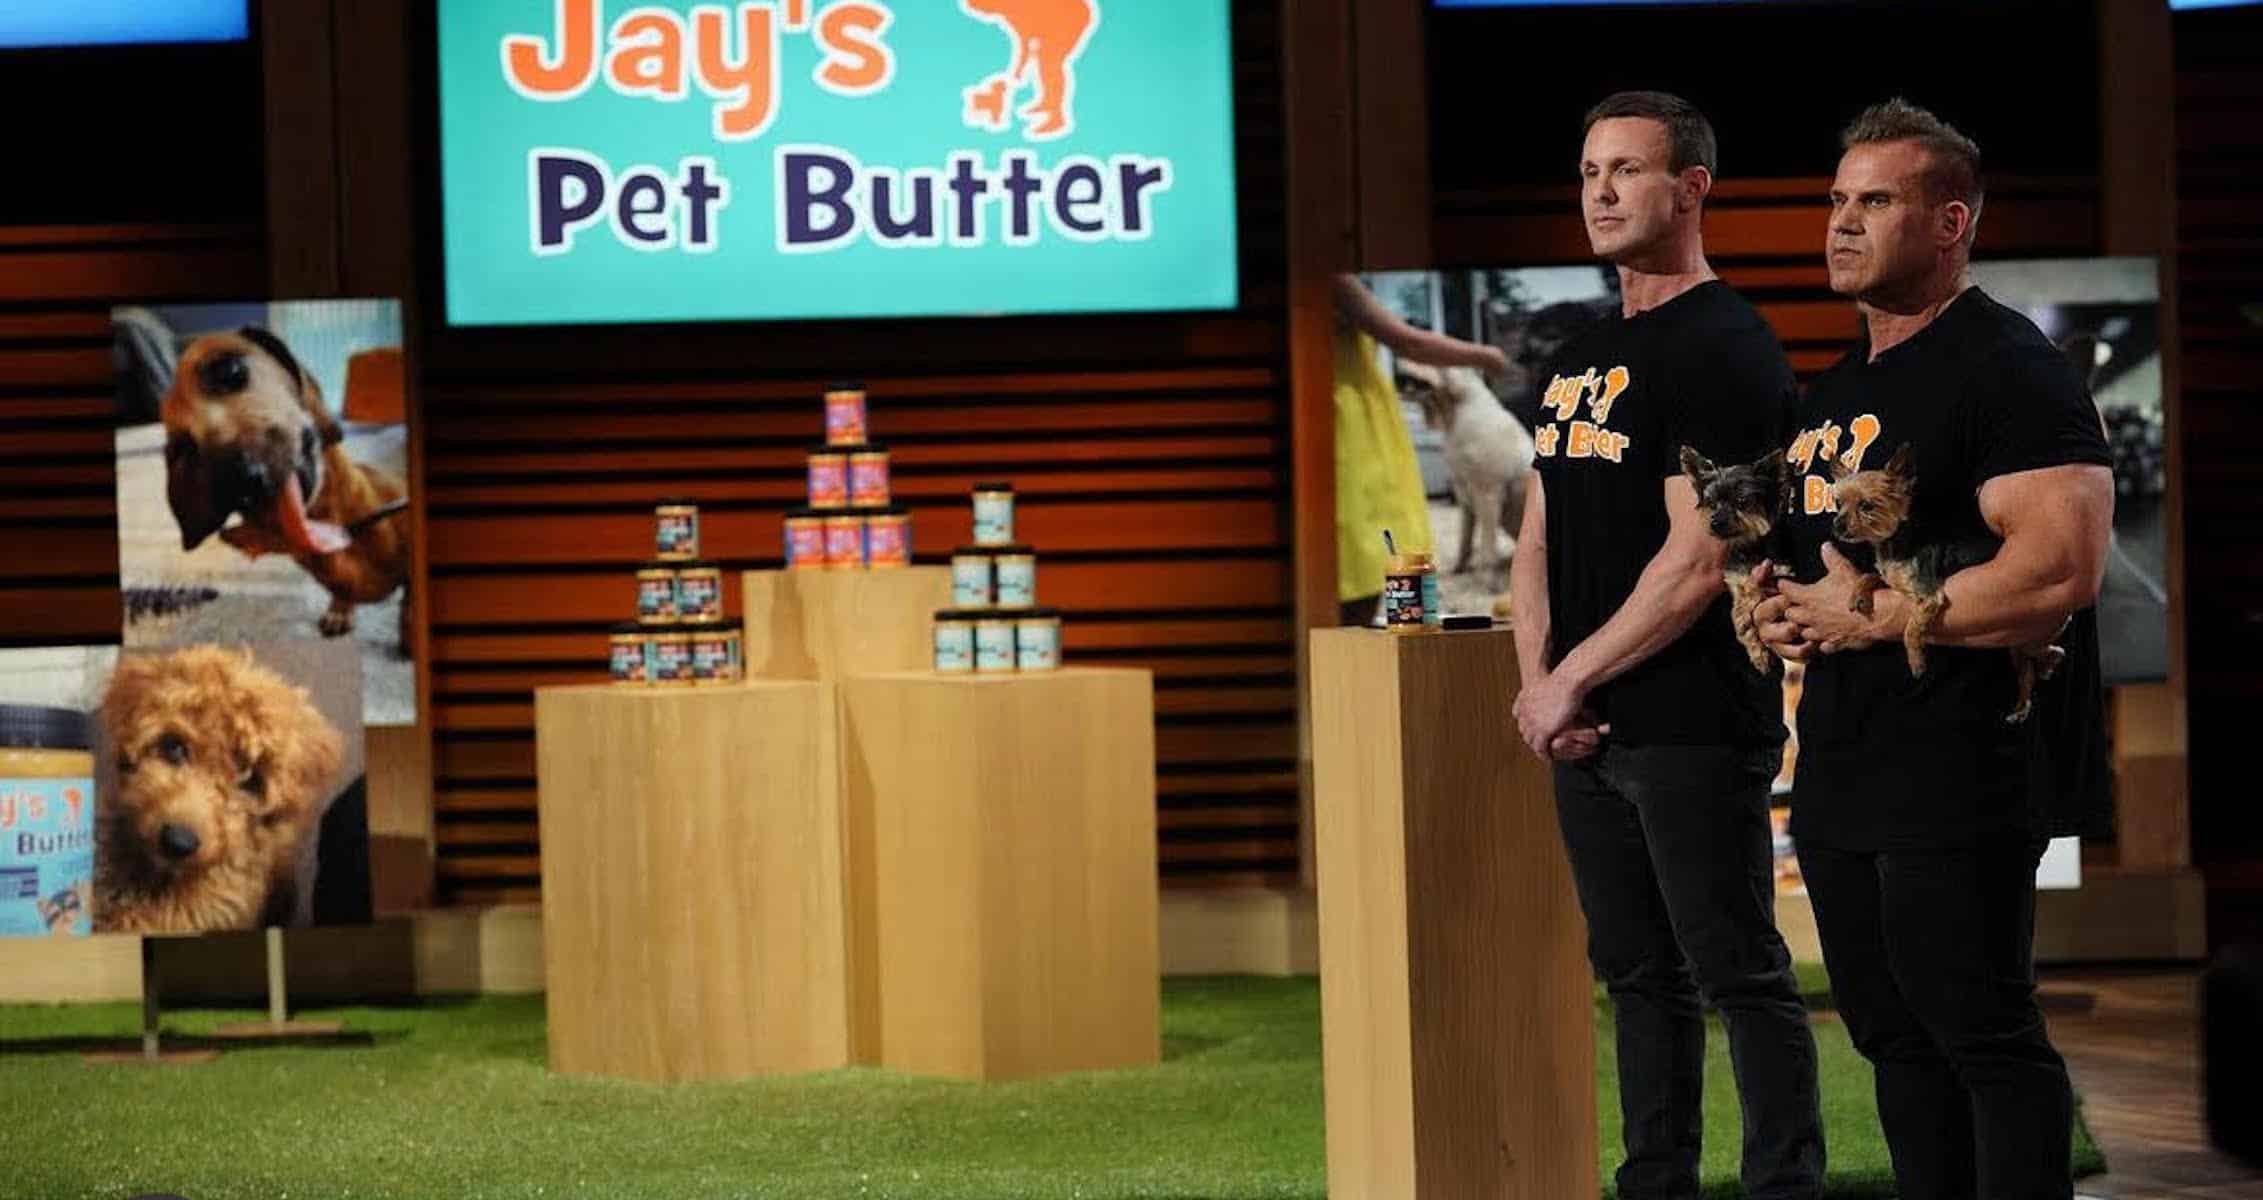 Jay Cutler will appear on this week's episode of Shark Tank to pitch Jay's Pet Butter.